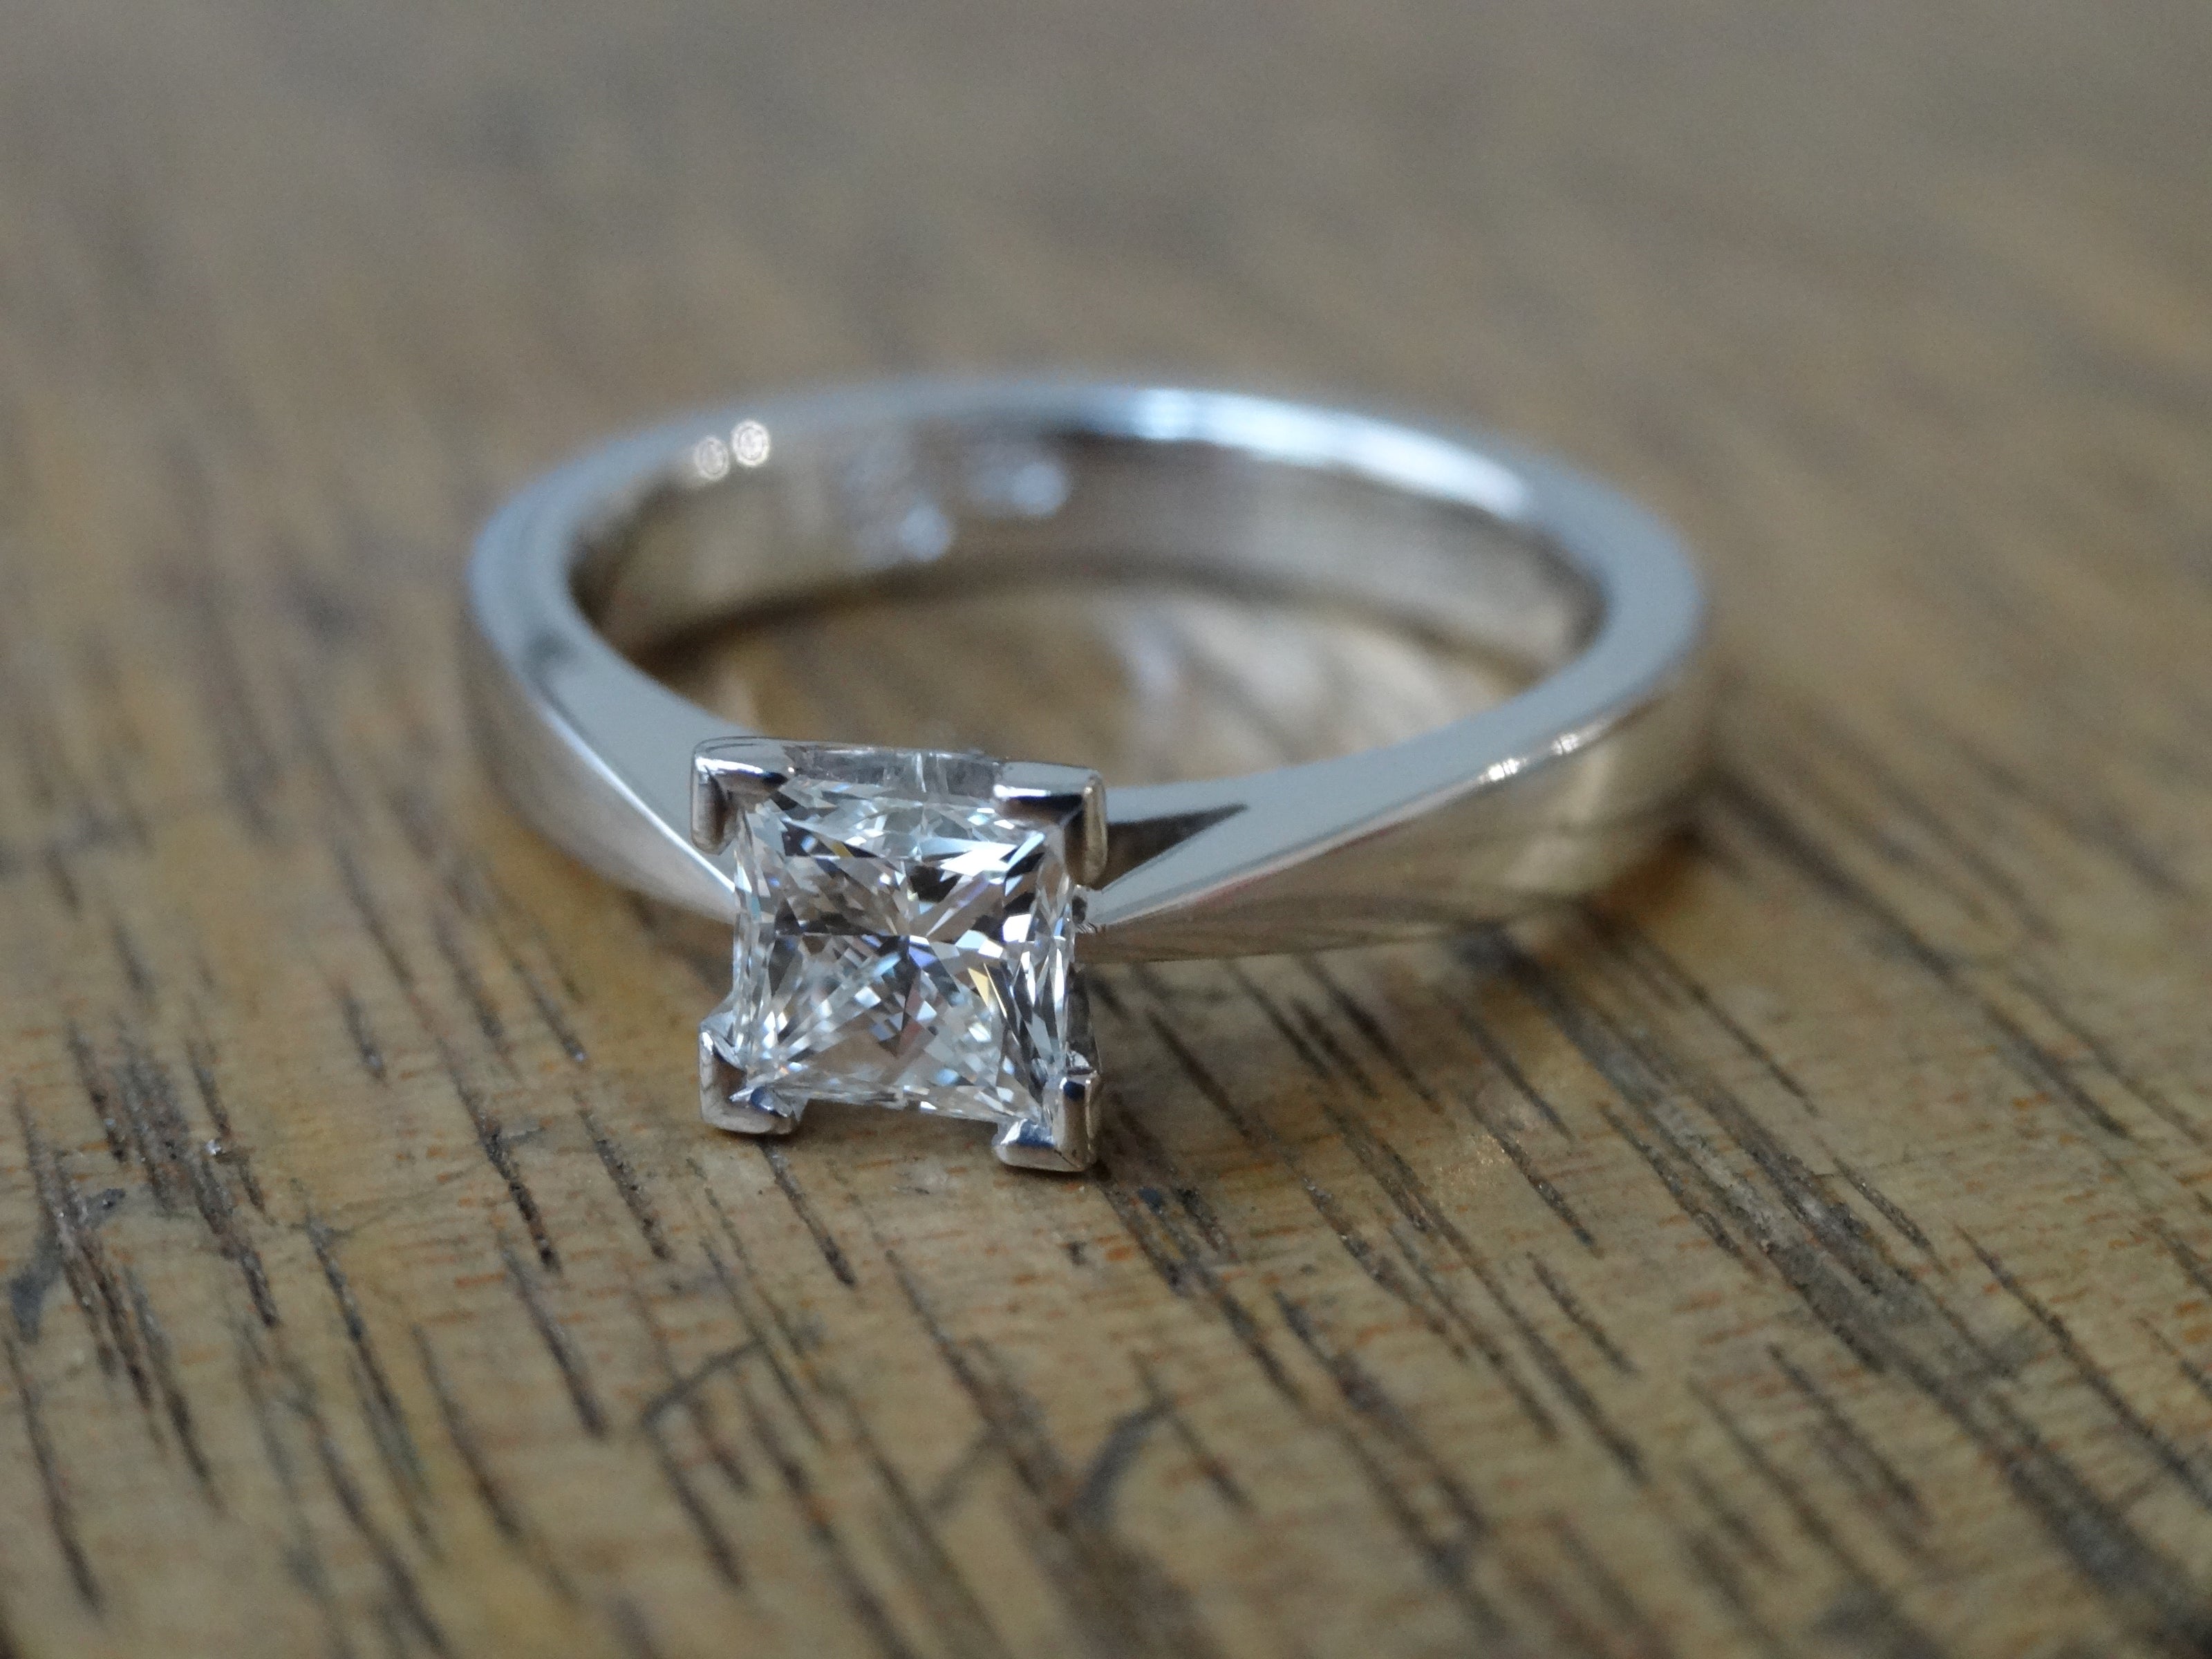 Recycled white gold solitaire engagement ring claw set with one princess cut diamond on a wooden surface